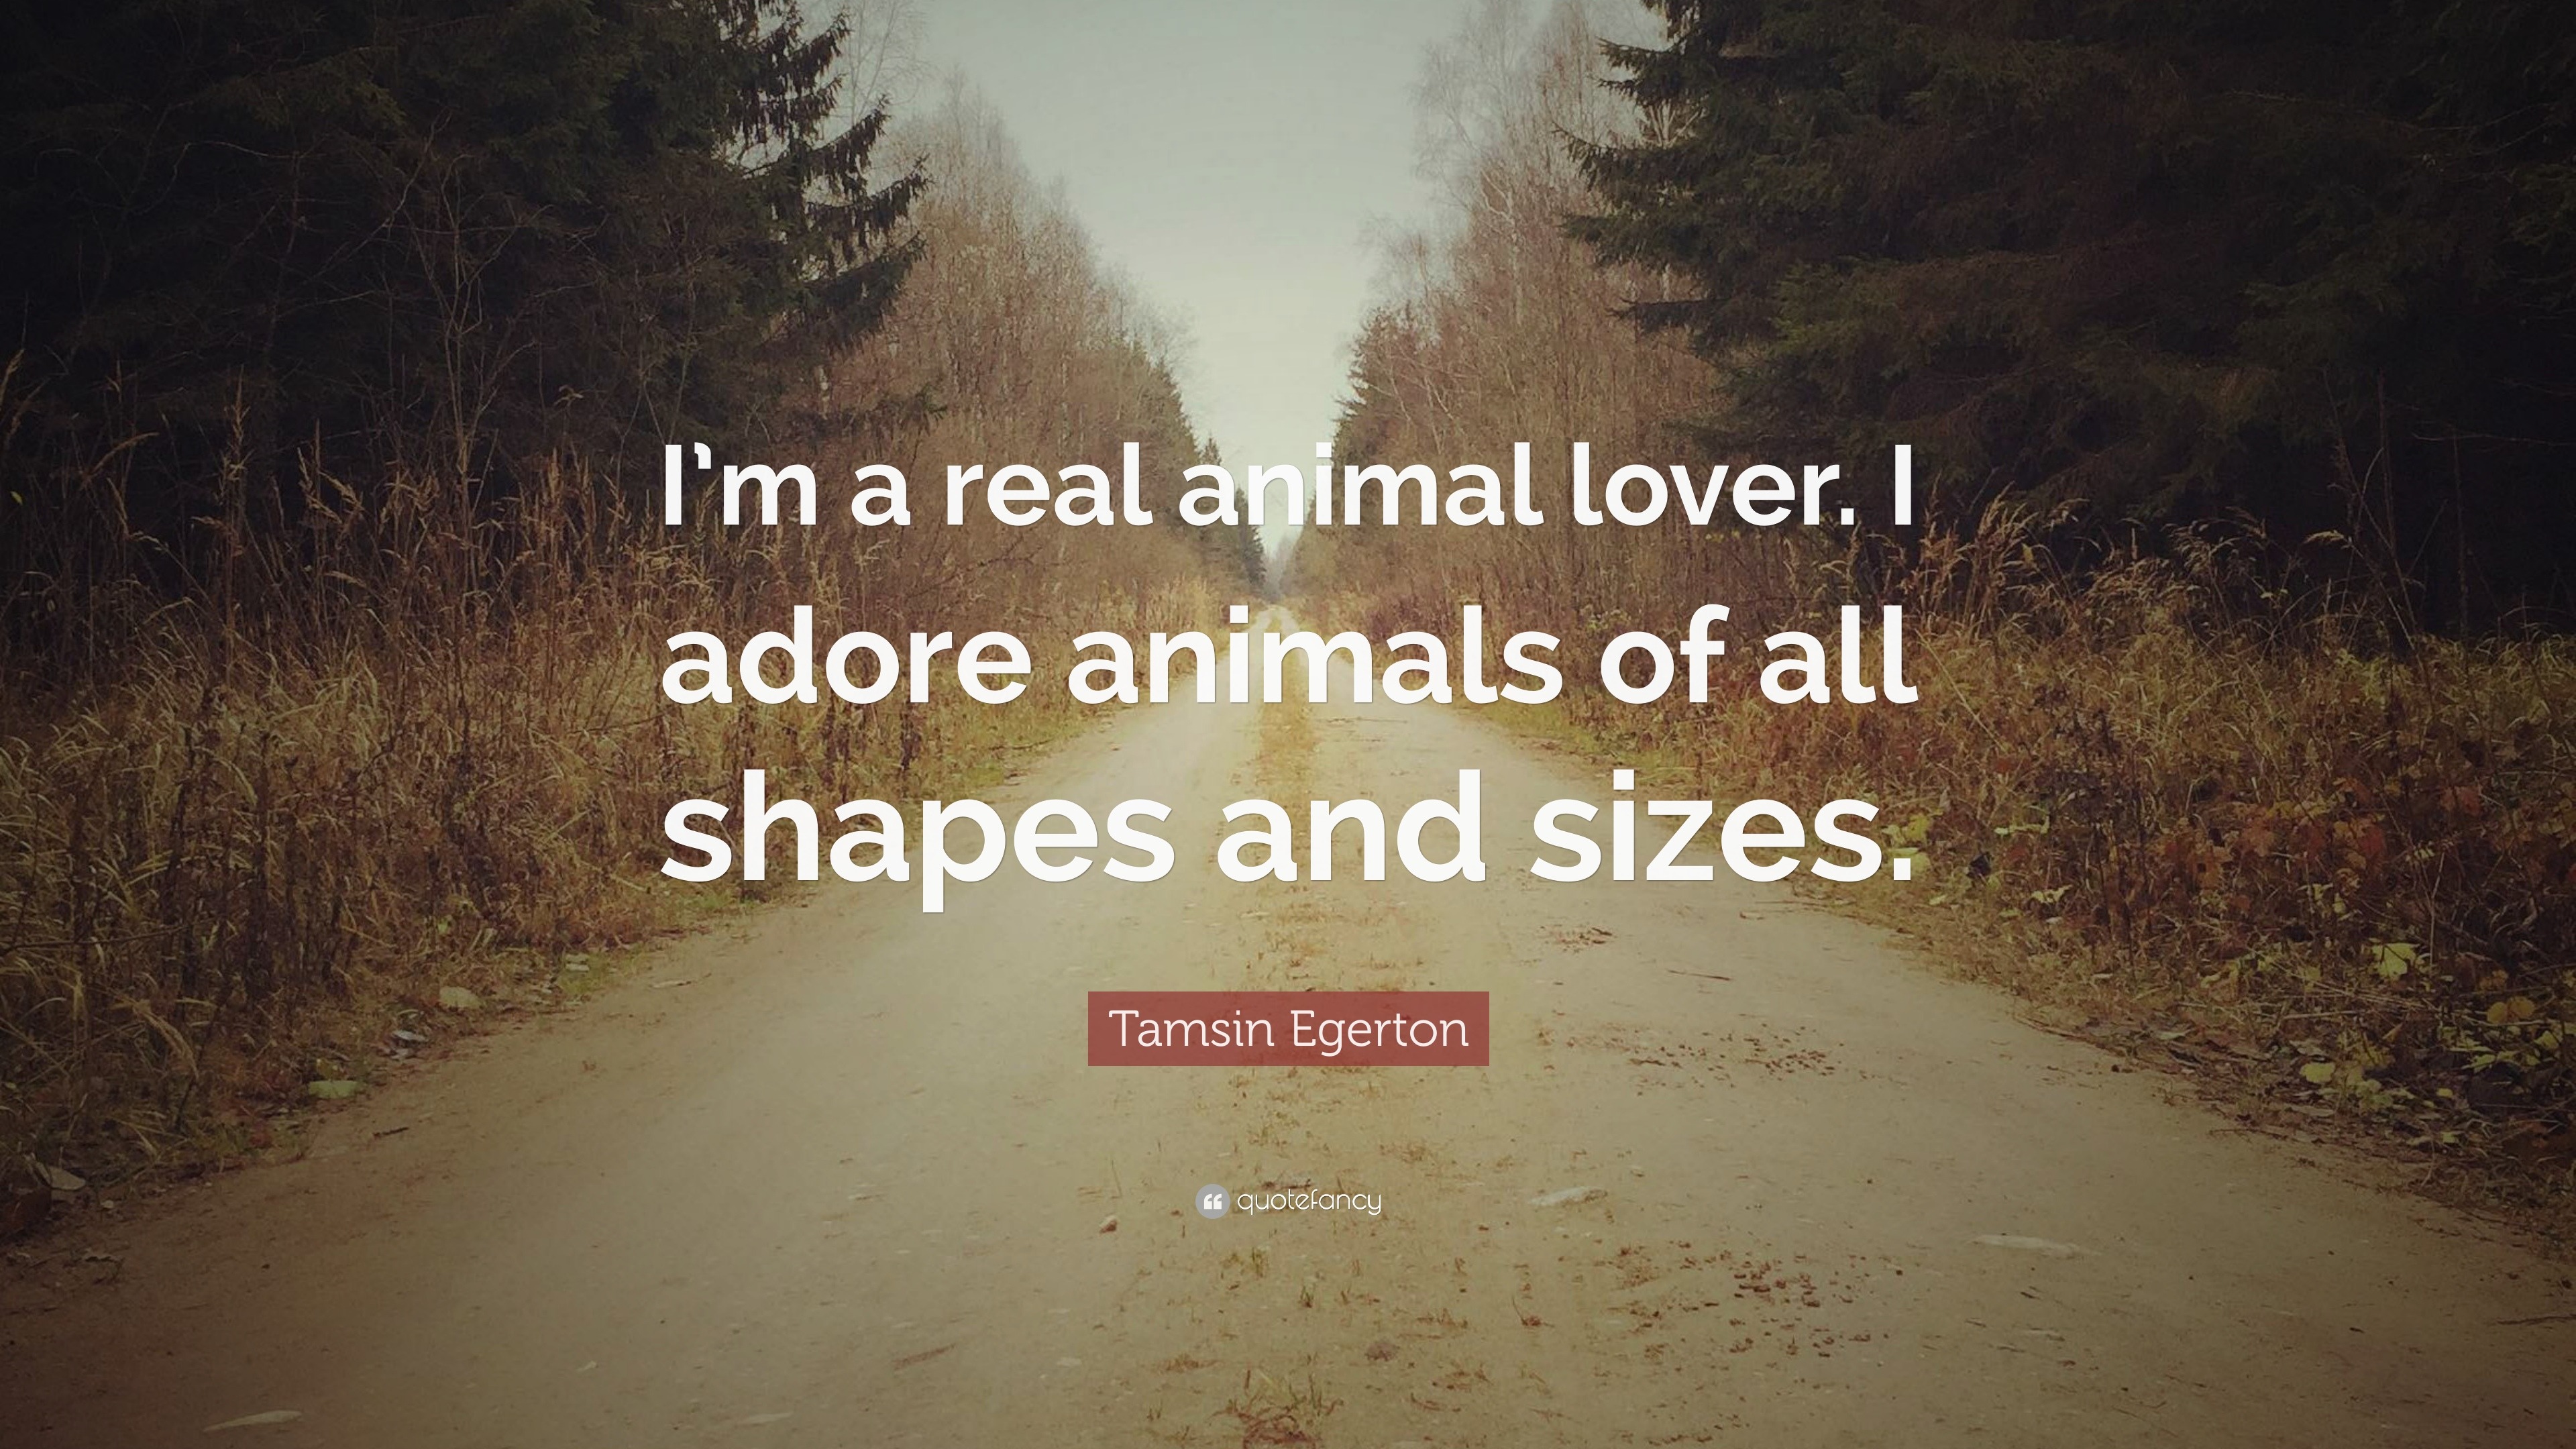 Tamsin Egerton Quote: “I'm a real animal lover. I adore animals of all  shapes and